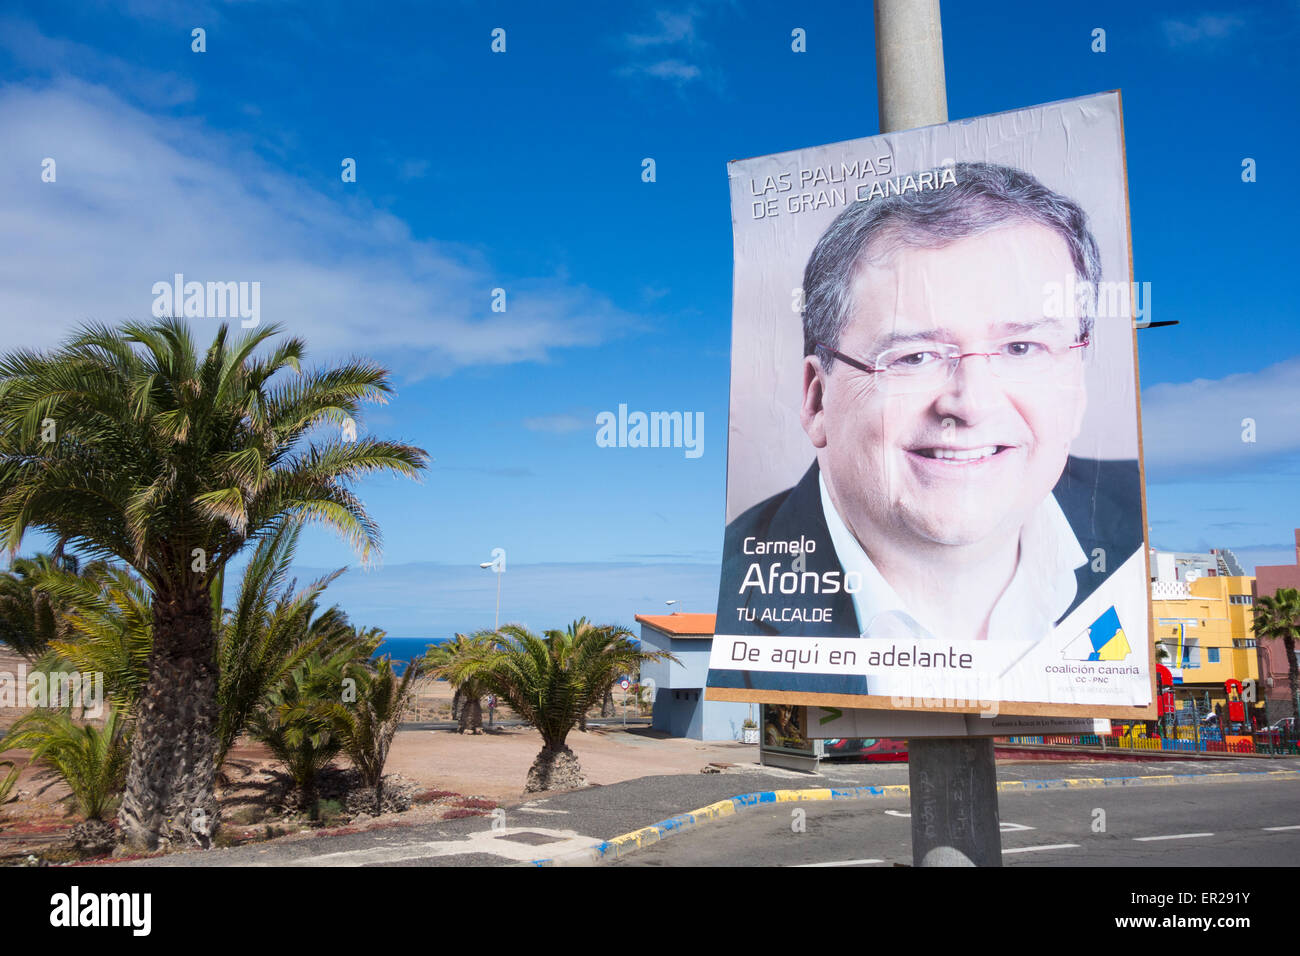 Las Palmas, Gran Canaria, Canary Islands, Spain. 25th May, 2015. Campaig poster for the Canarian Coalition party who, following Sunday`s municipal and regional elections, are now the largest party in the local Gran Canaria parliament with 18 seats, six more than the conservative PP (Popular Party), who saw their municipal and regional powers eroded across much of Spain in Sunday`s elections Credit:  ALANDAWSONPHOTOGRAPHY/Alamy Live News Stock Photo